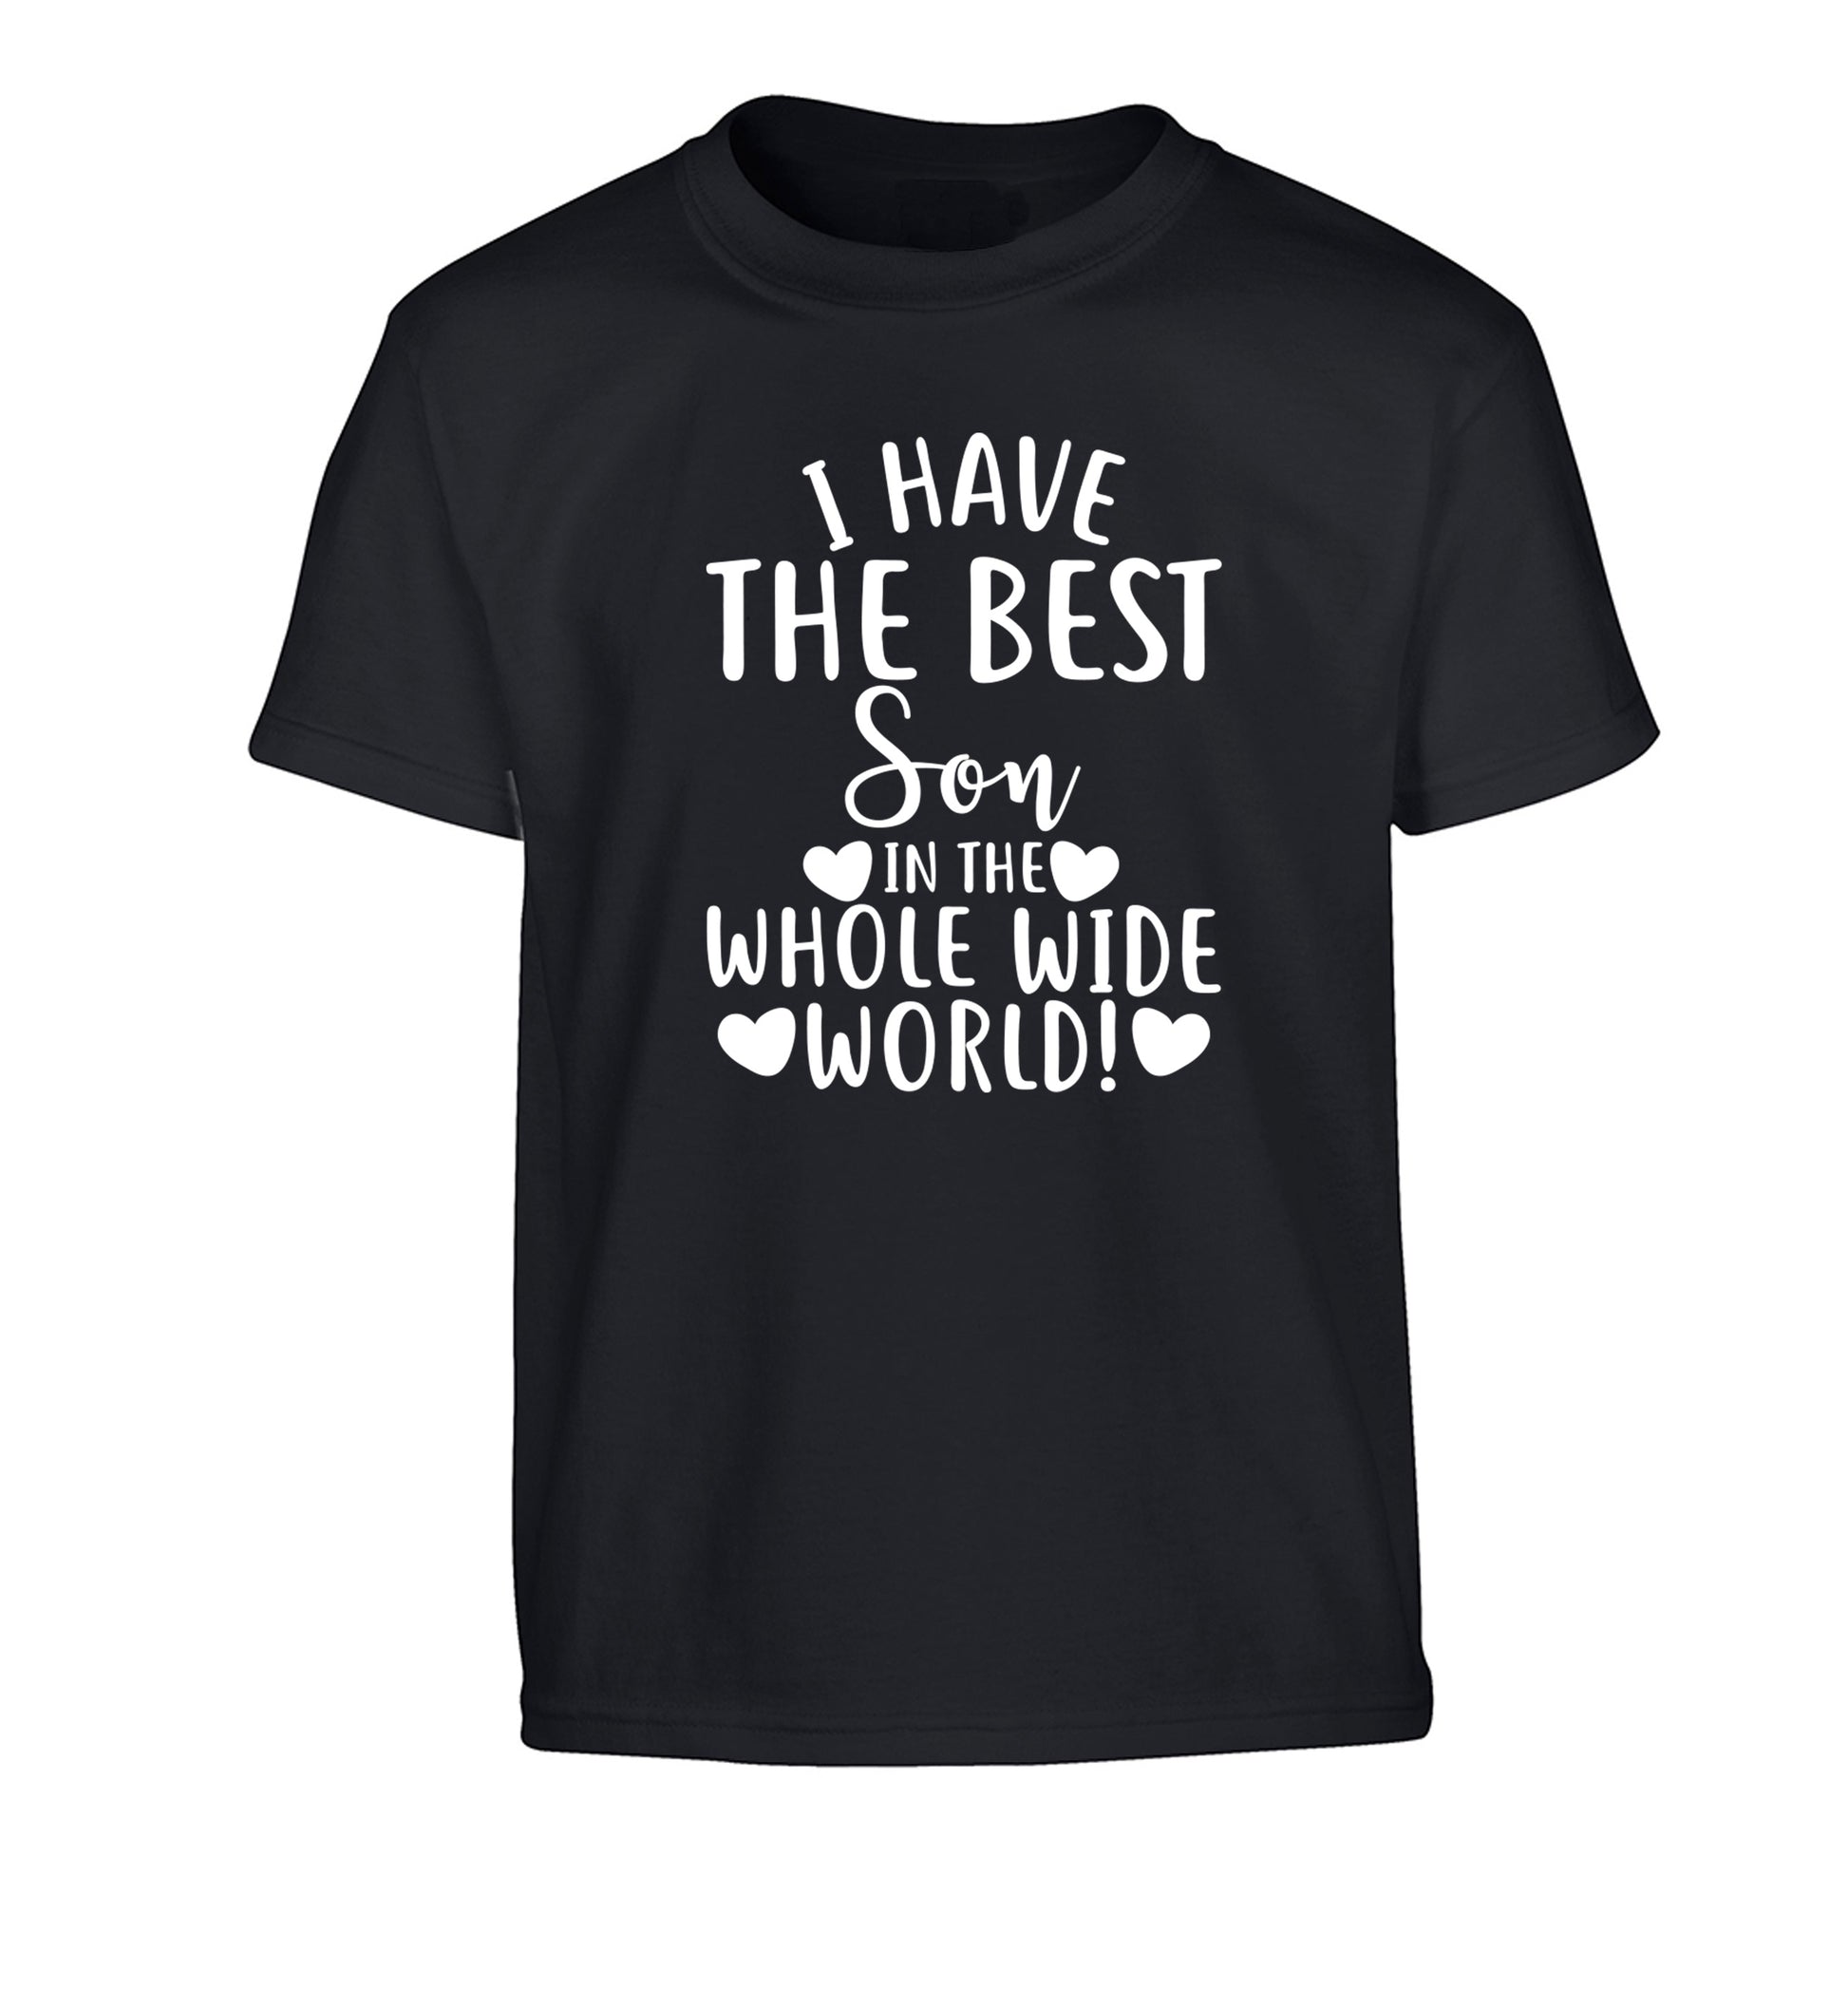 I have the best son in the whole wide world! Children's black Tshirt 12-13 Years